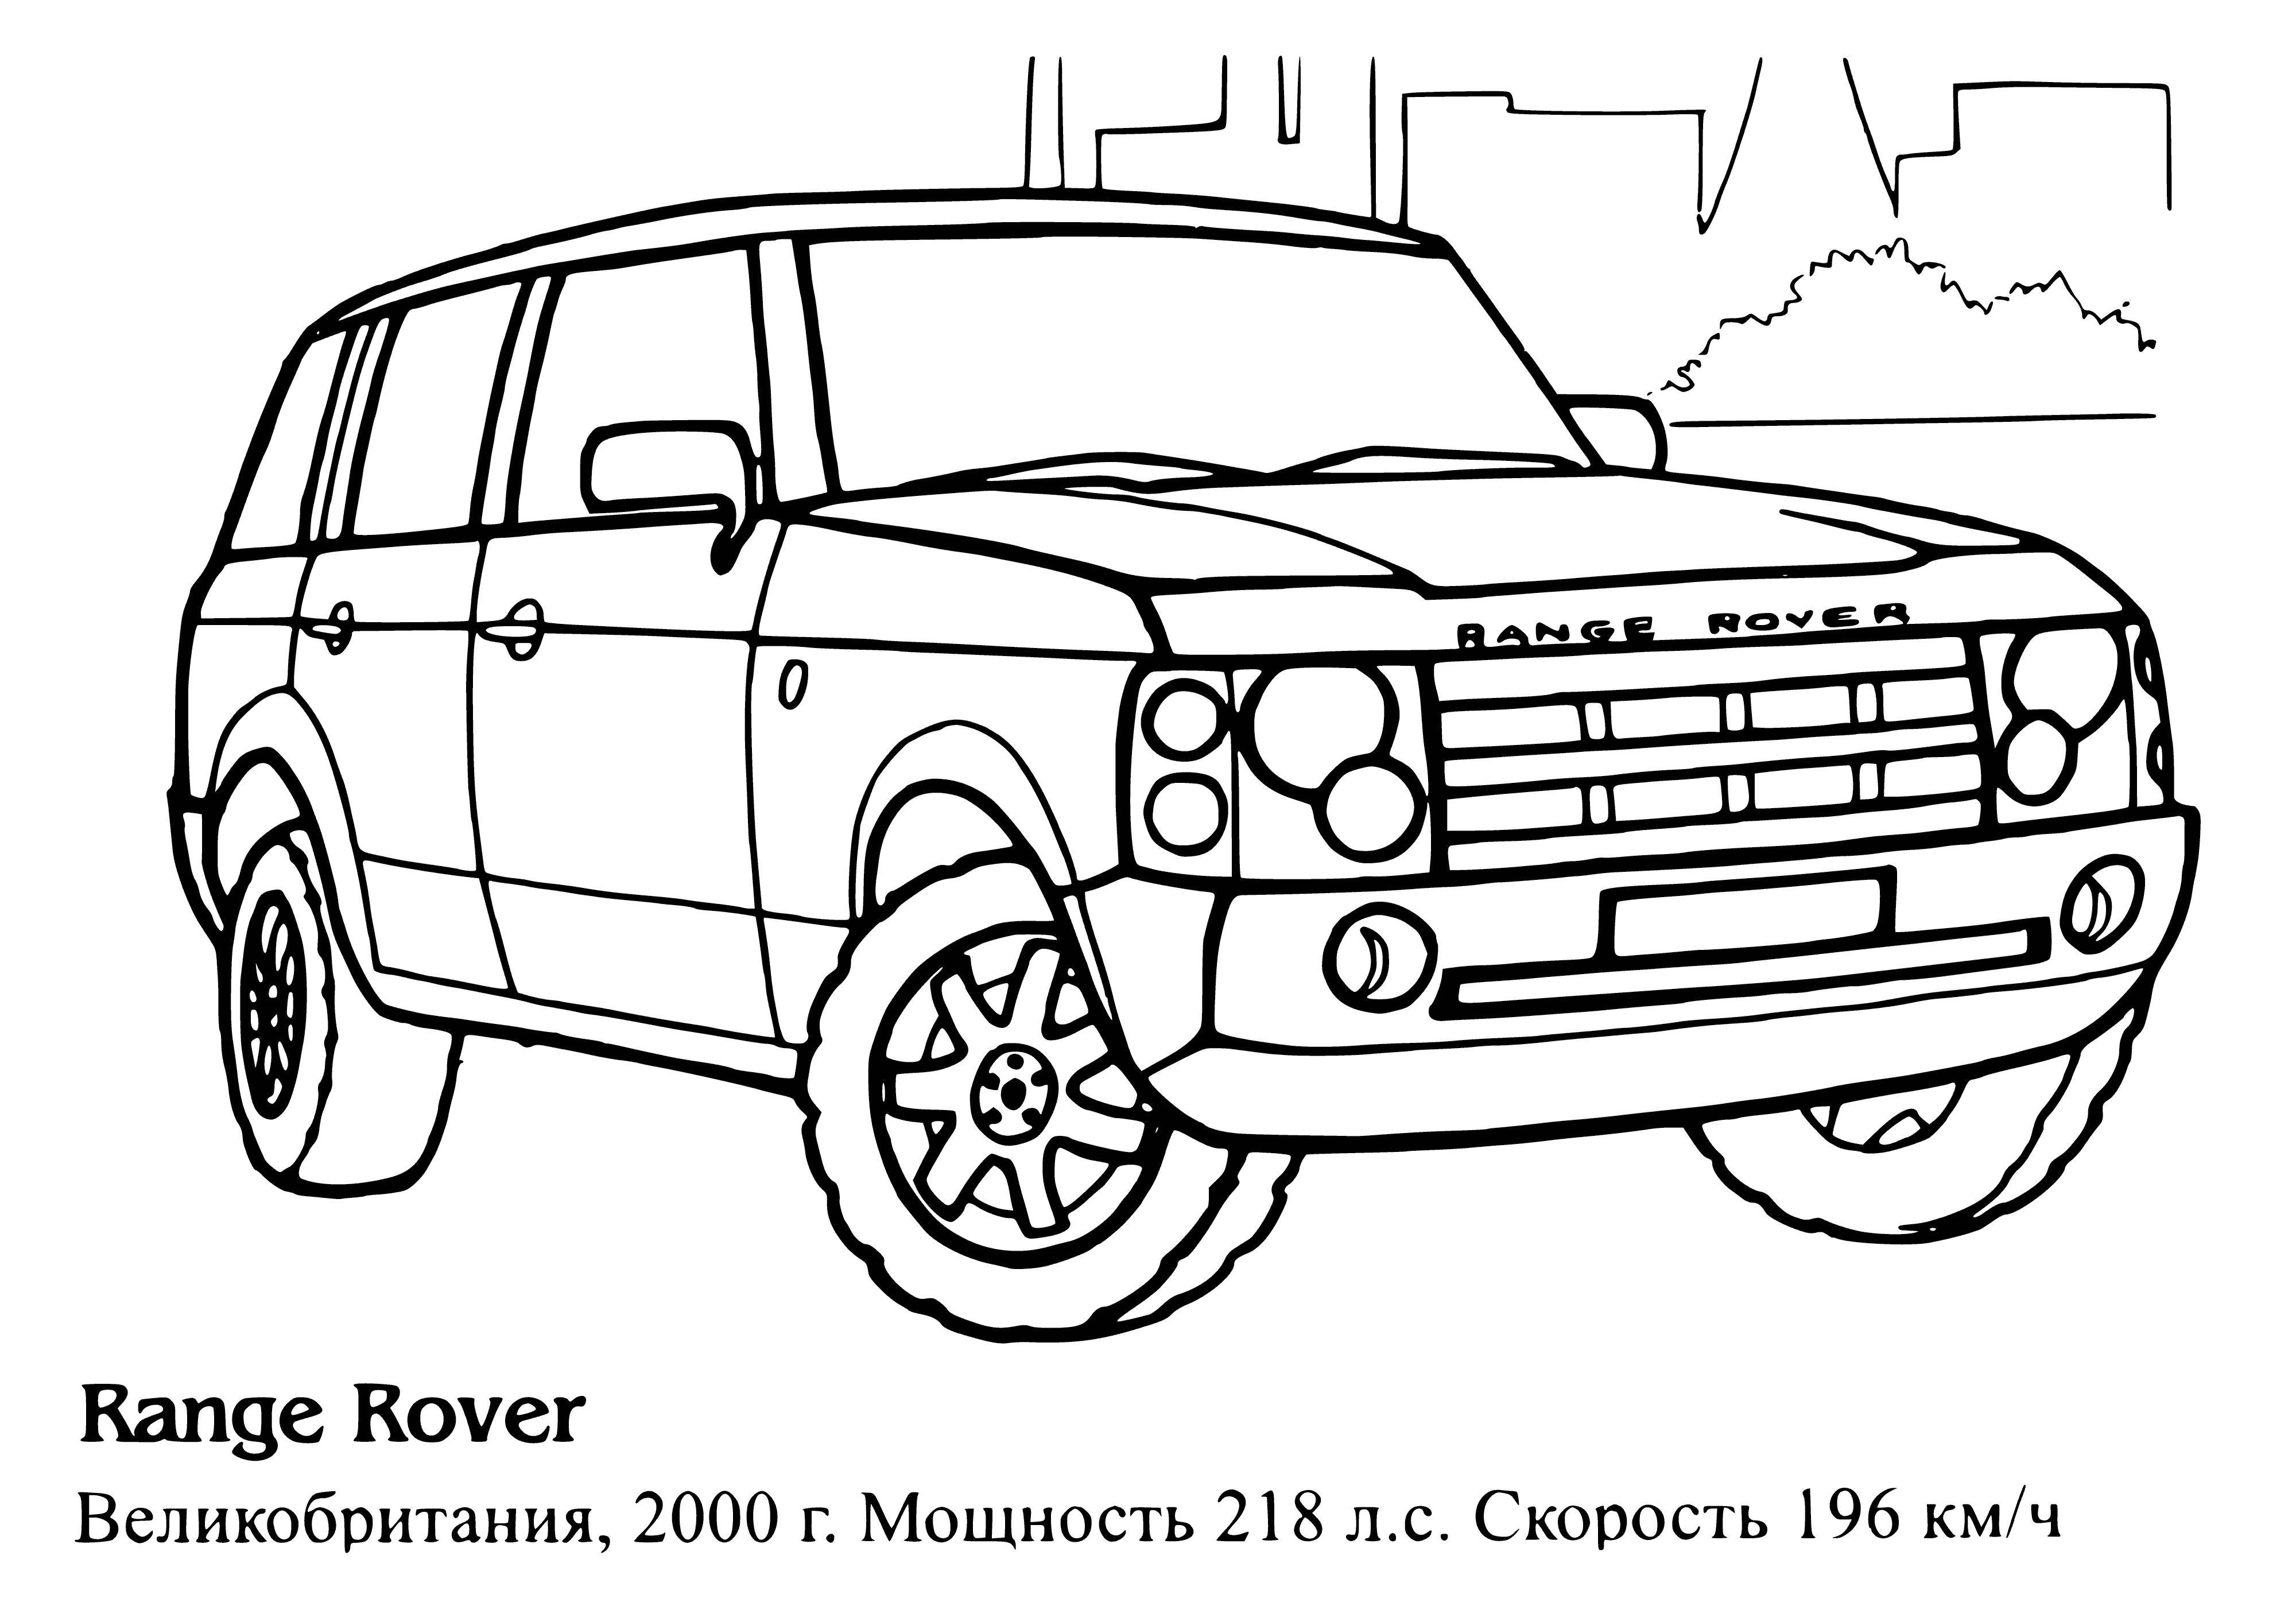 Range Rover coloring page